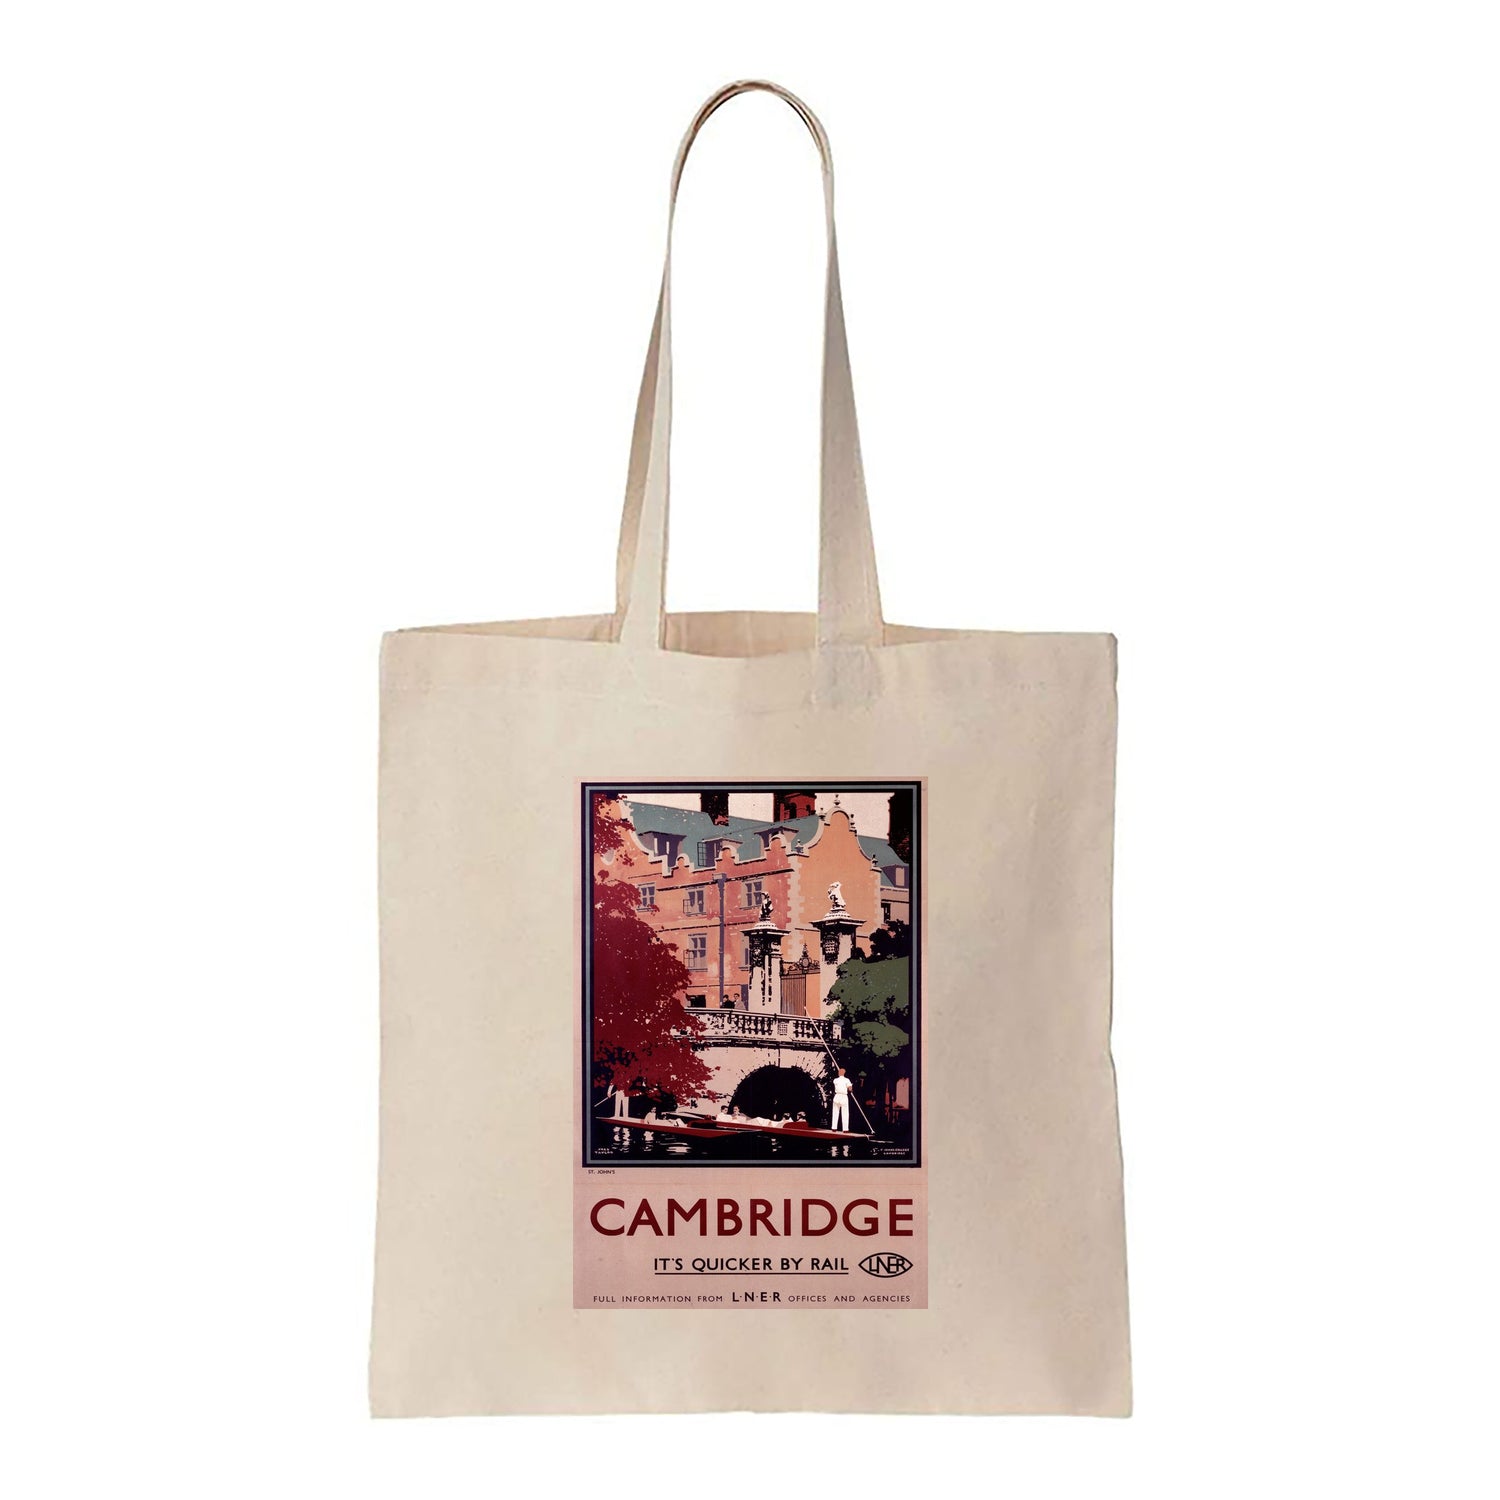 Cambridge it's Quicker by Rail - Punting - Canvas Tote Bag